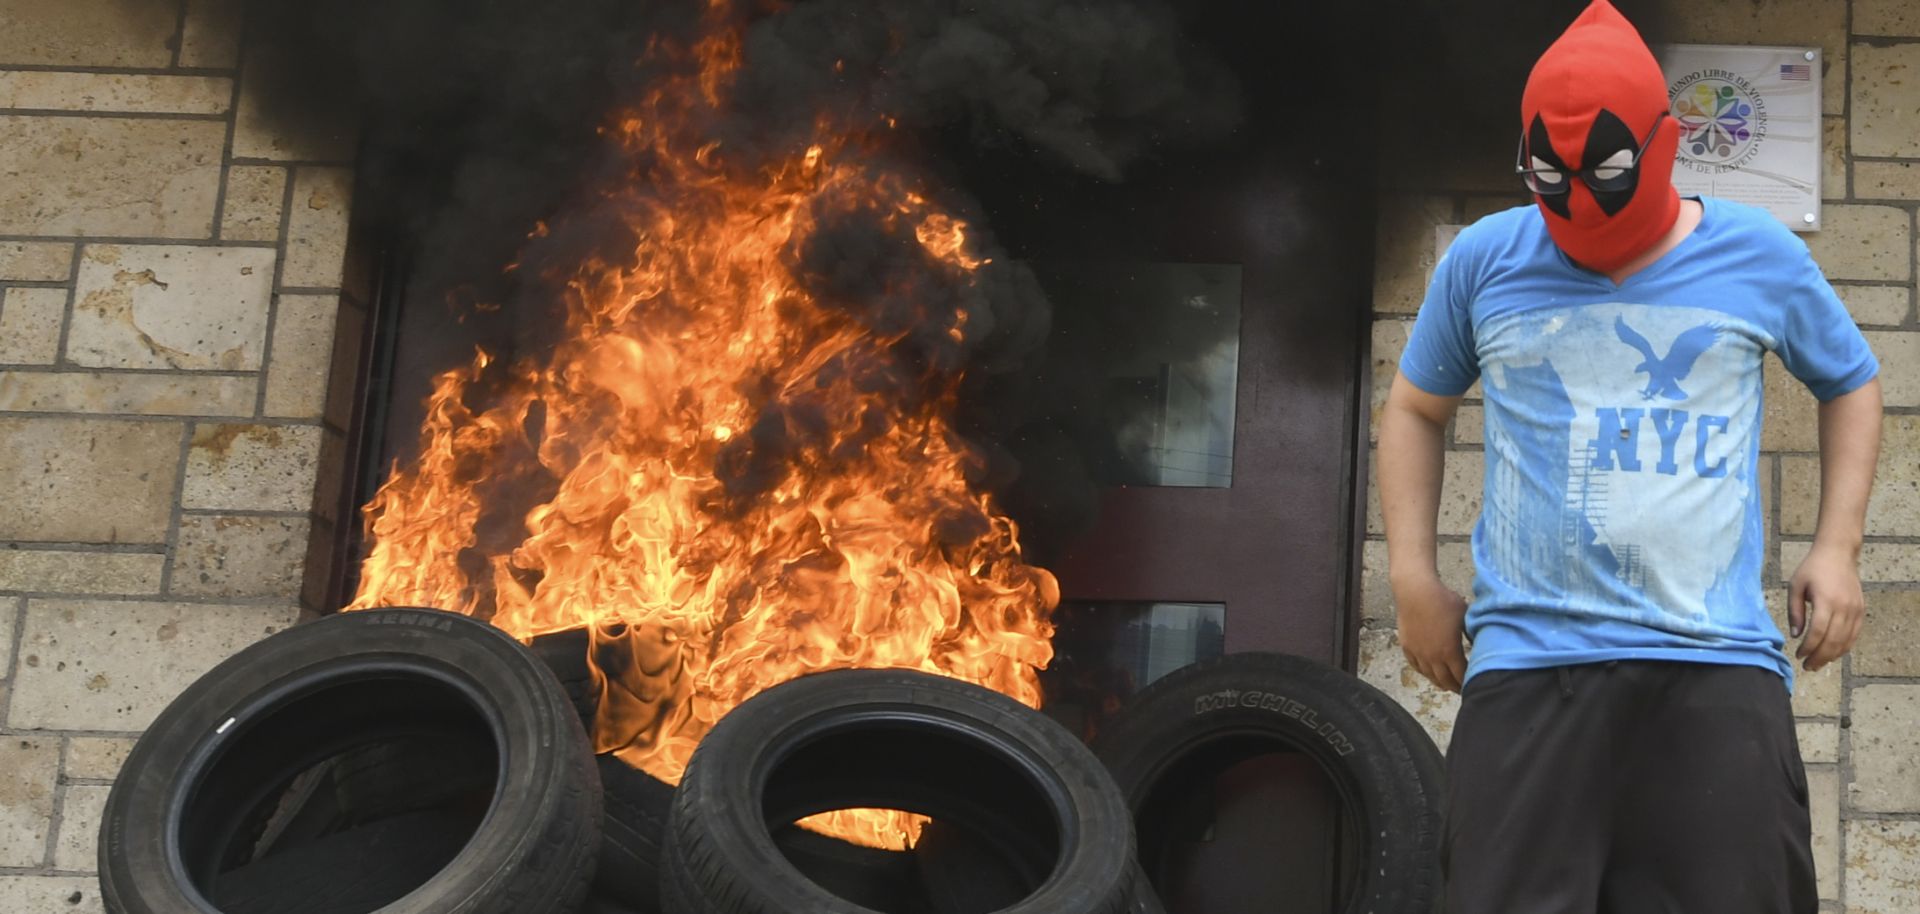 A tire fire burns at the doors to the outer entrance of the U.S. Embassy in Tegucigalpa on May 31, 2019.